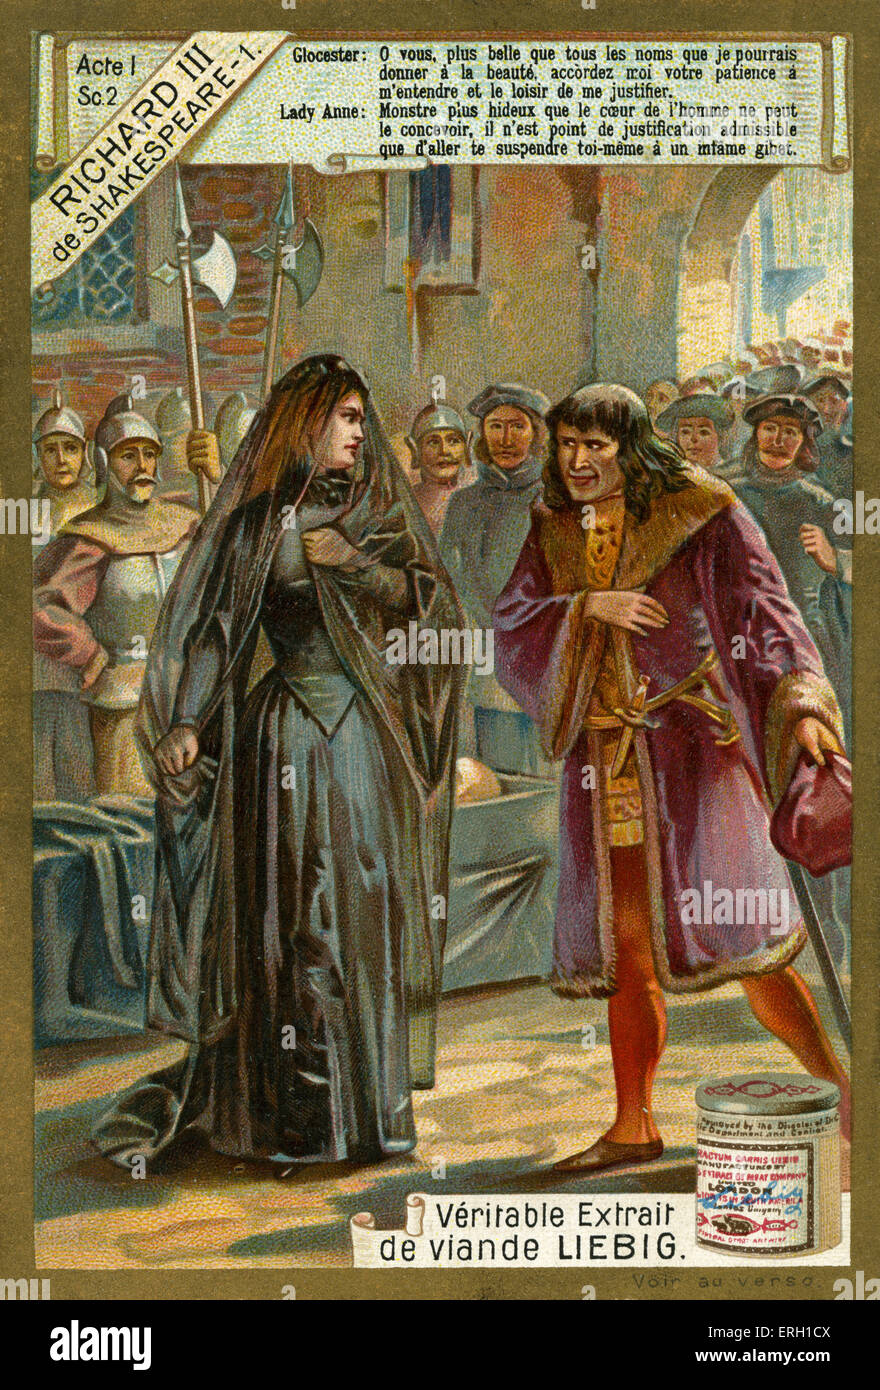 Richard III by William Shakespeare.  Act I. Scene 2    Lady Anne and Richard,  duke of Gloucester: The widow of King Henry VI’s Stock Photo